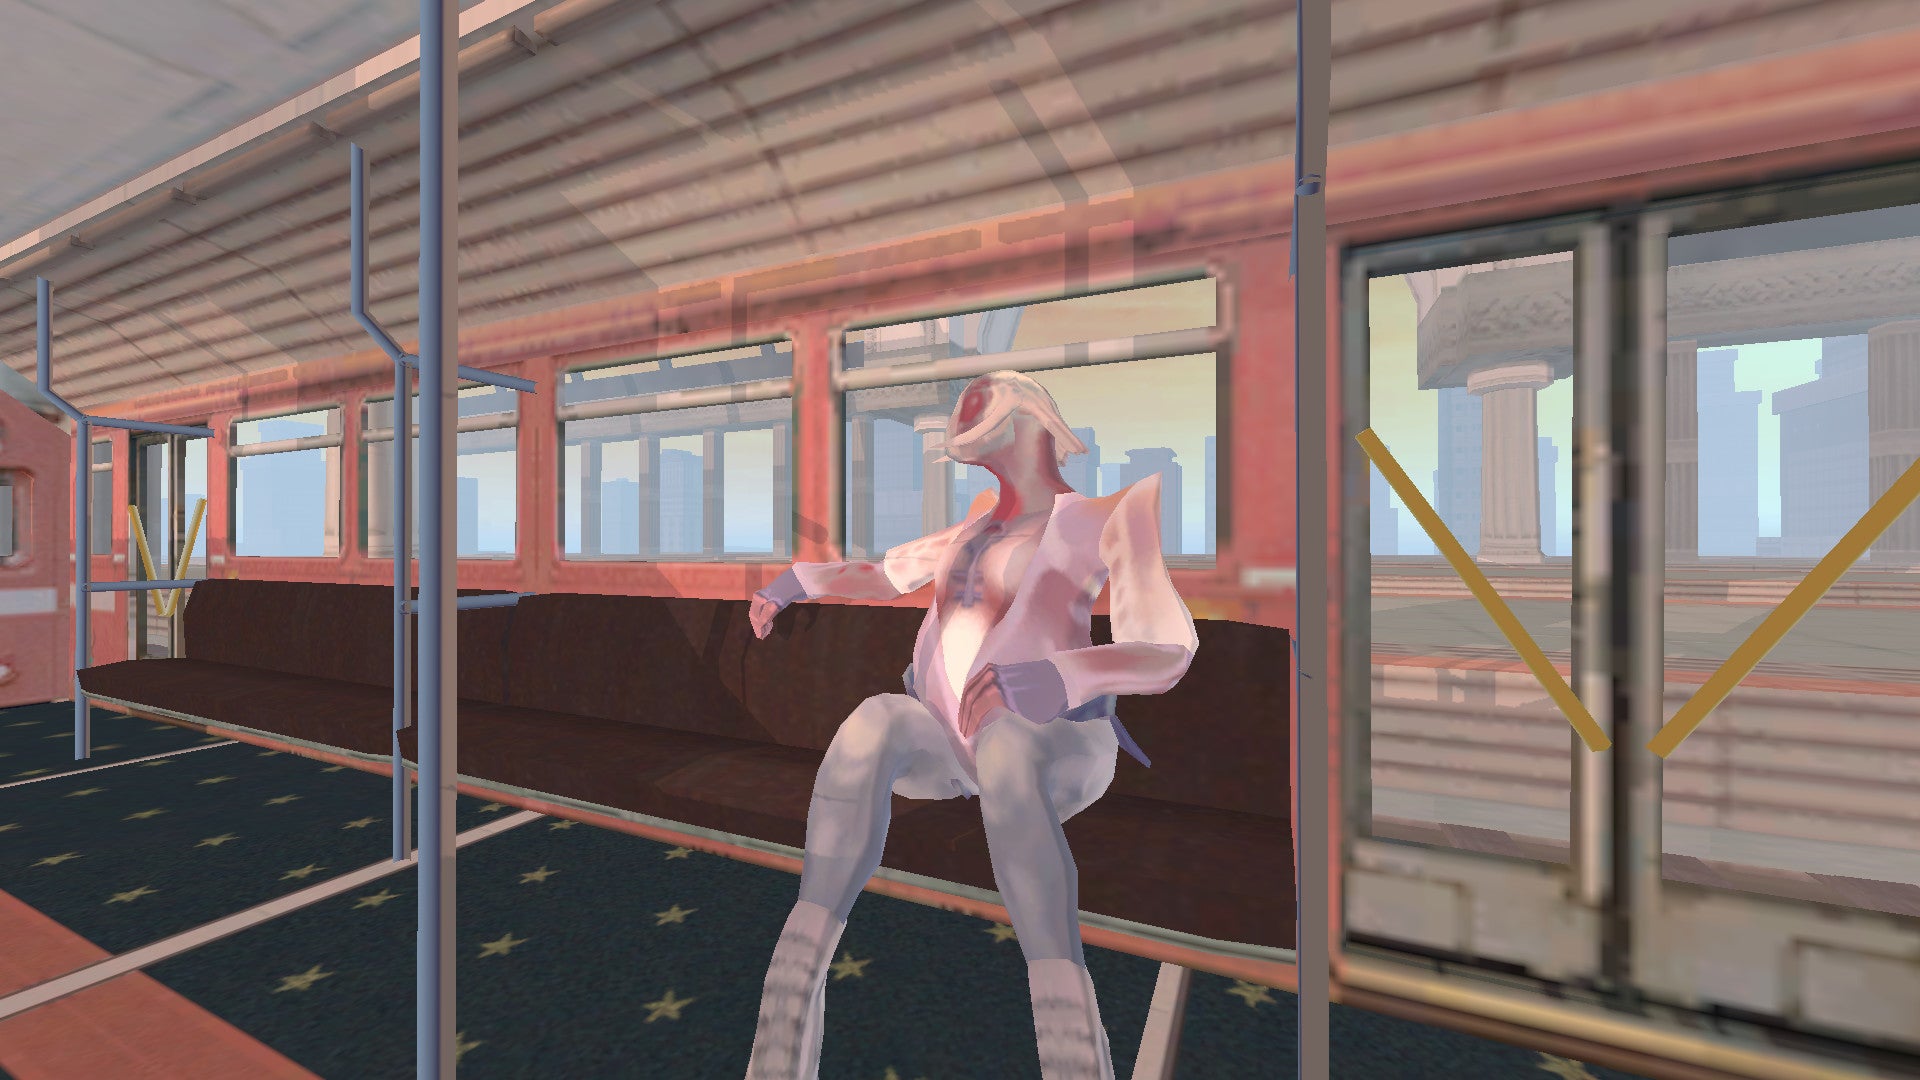 A screenshot of Sephonie showing a bipedal humanoid creature sitting on a subway train